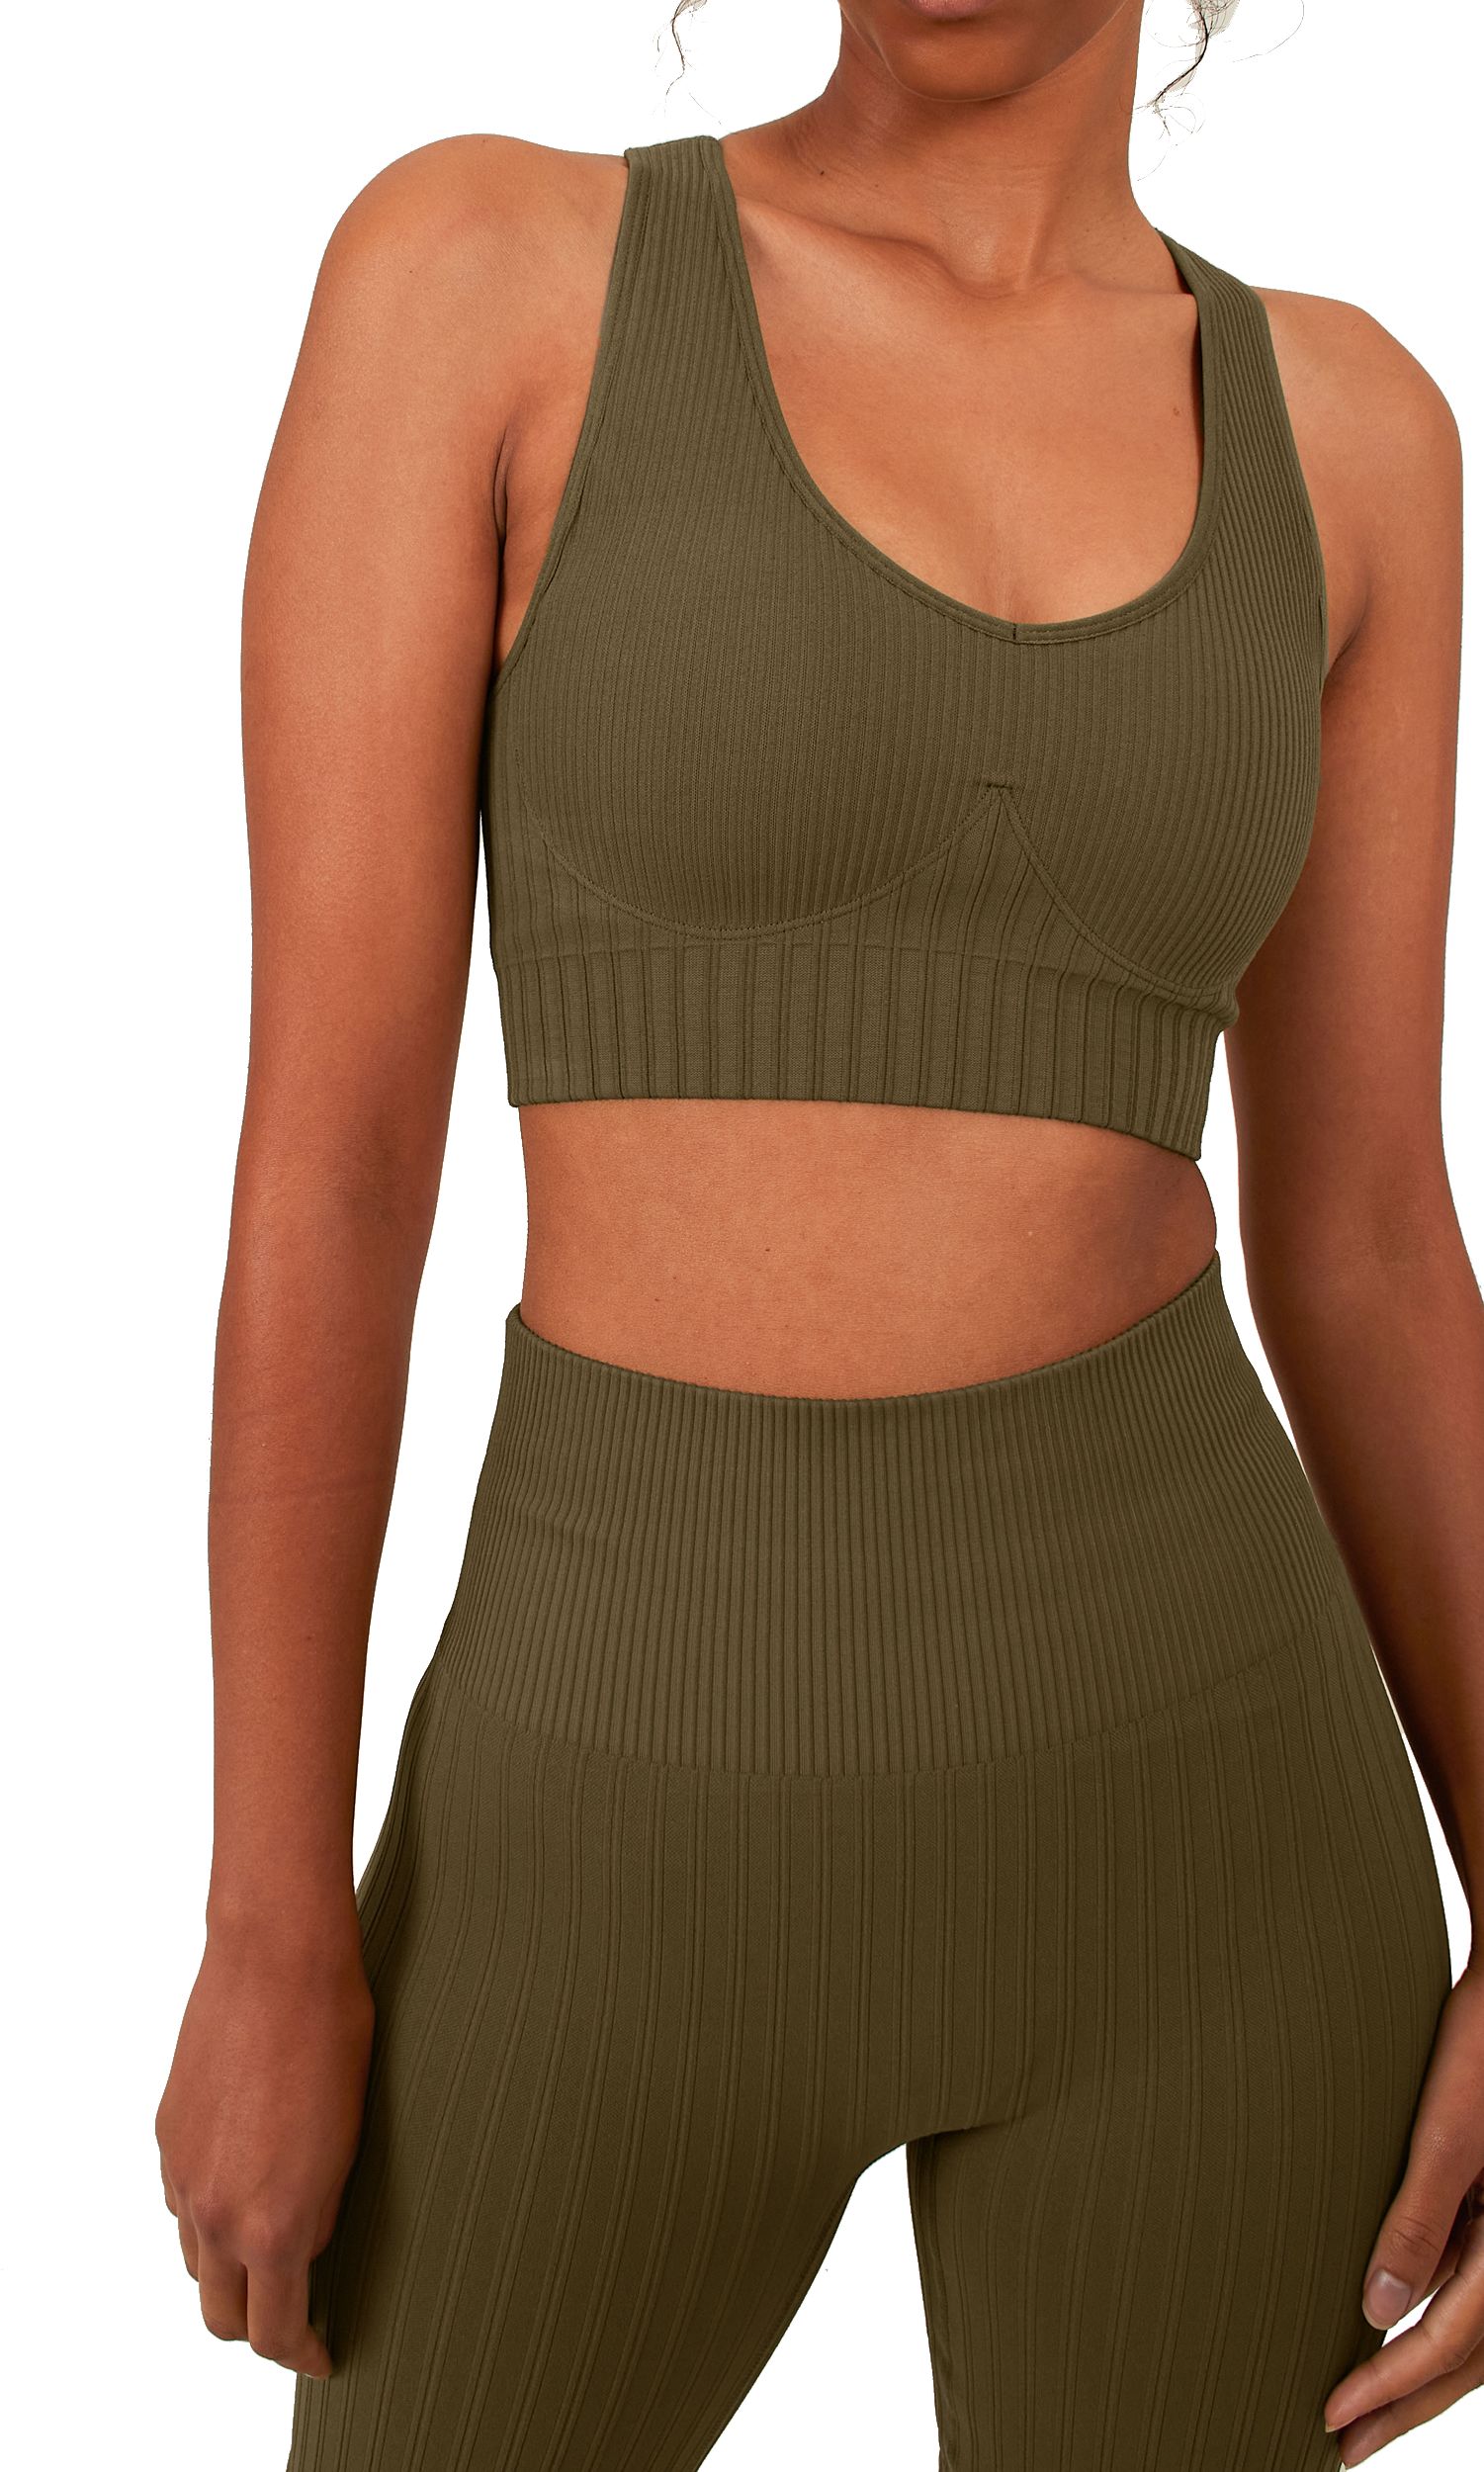 STAY IN PLACE, SEAMLESS COMFY SPORTS BRA W